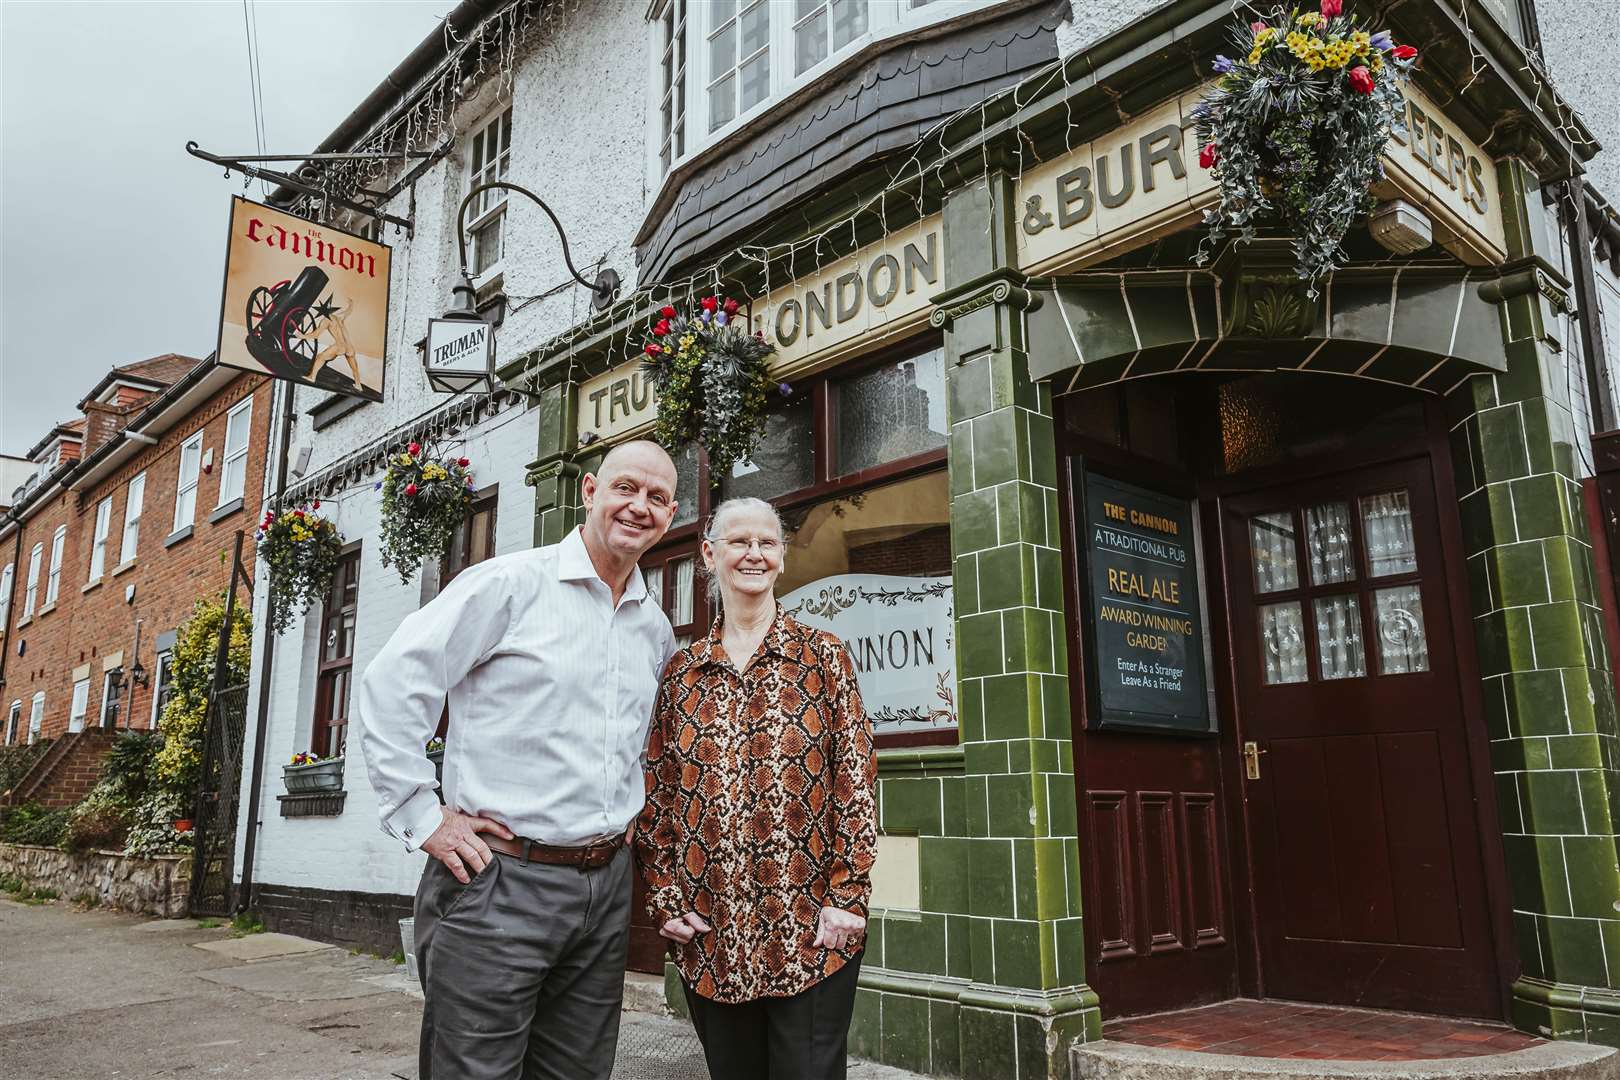 The pub in Garden Street, Brompton, Gillingham, has joined the campaign to help struggling boozers. Picture: Stella Artois